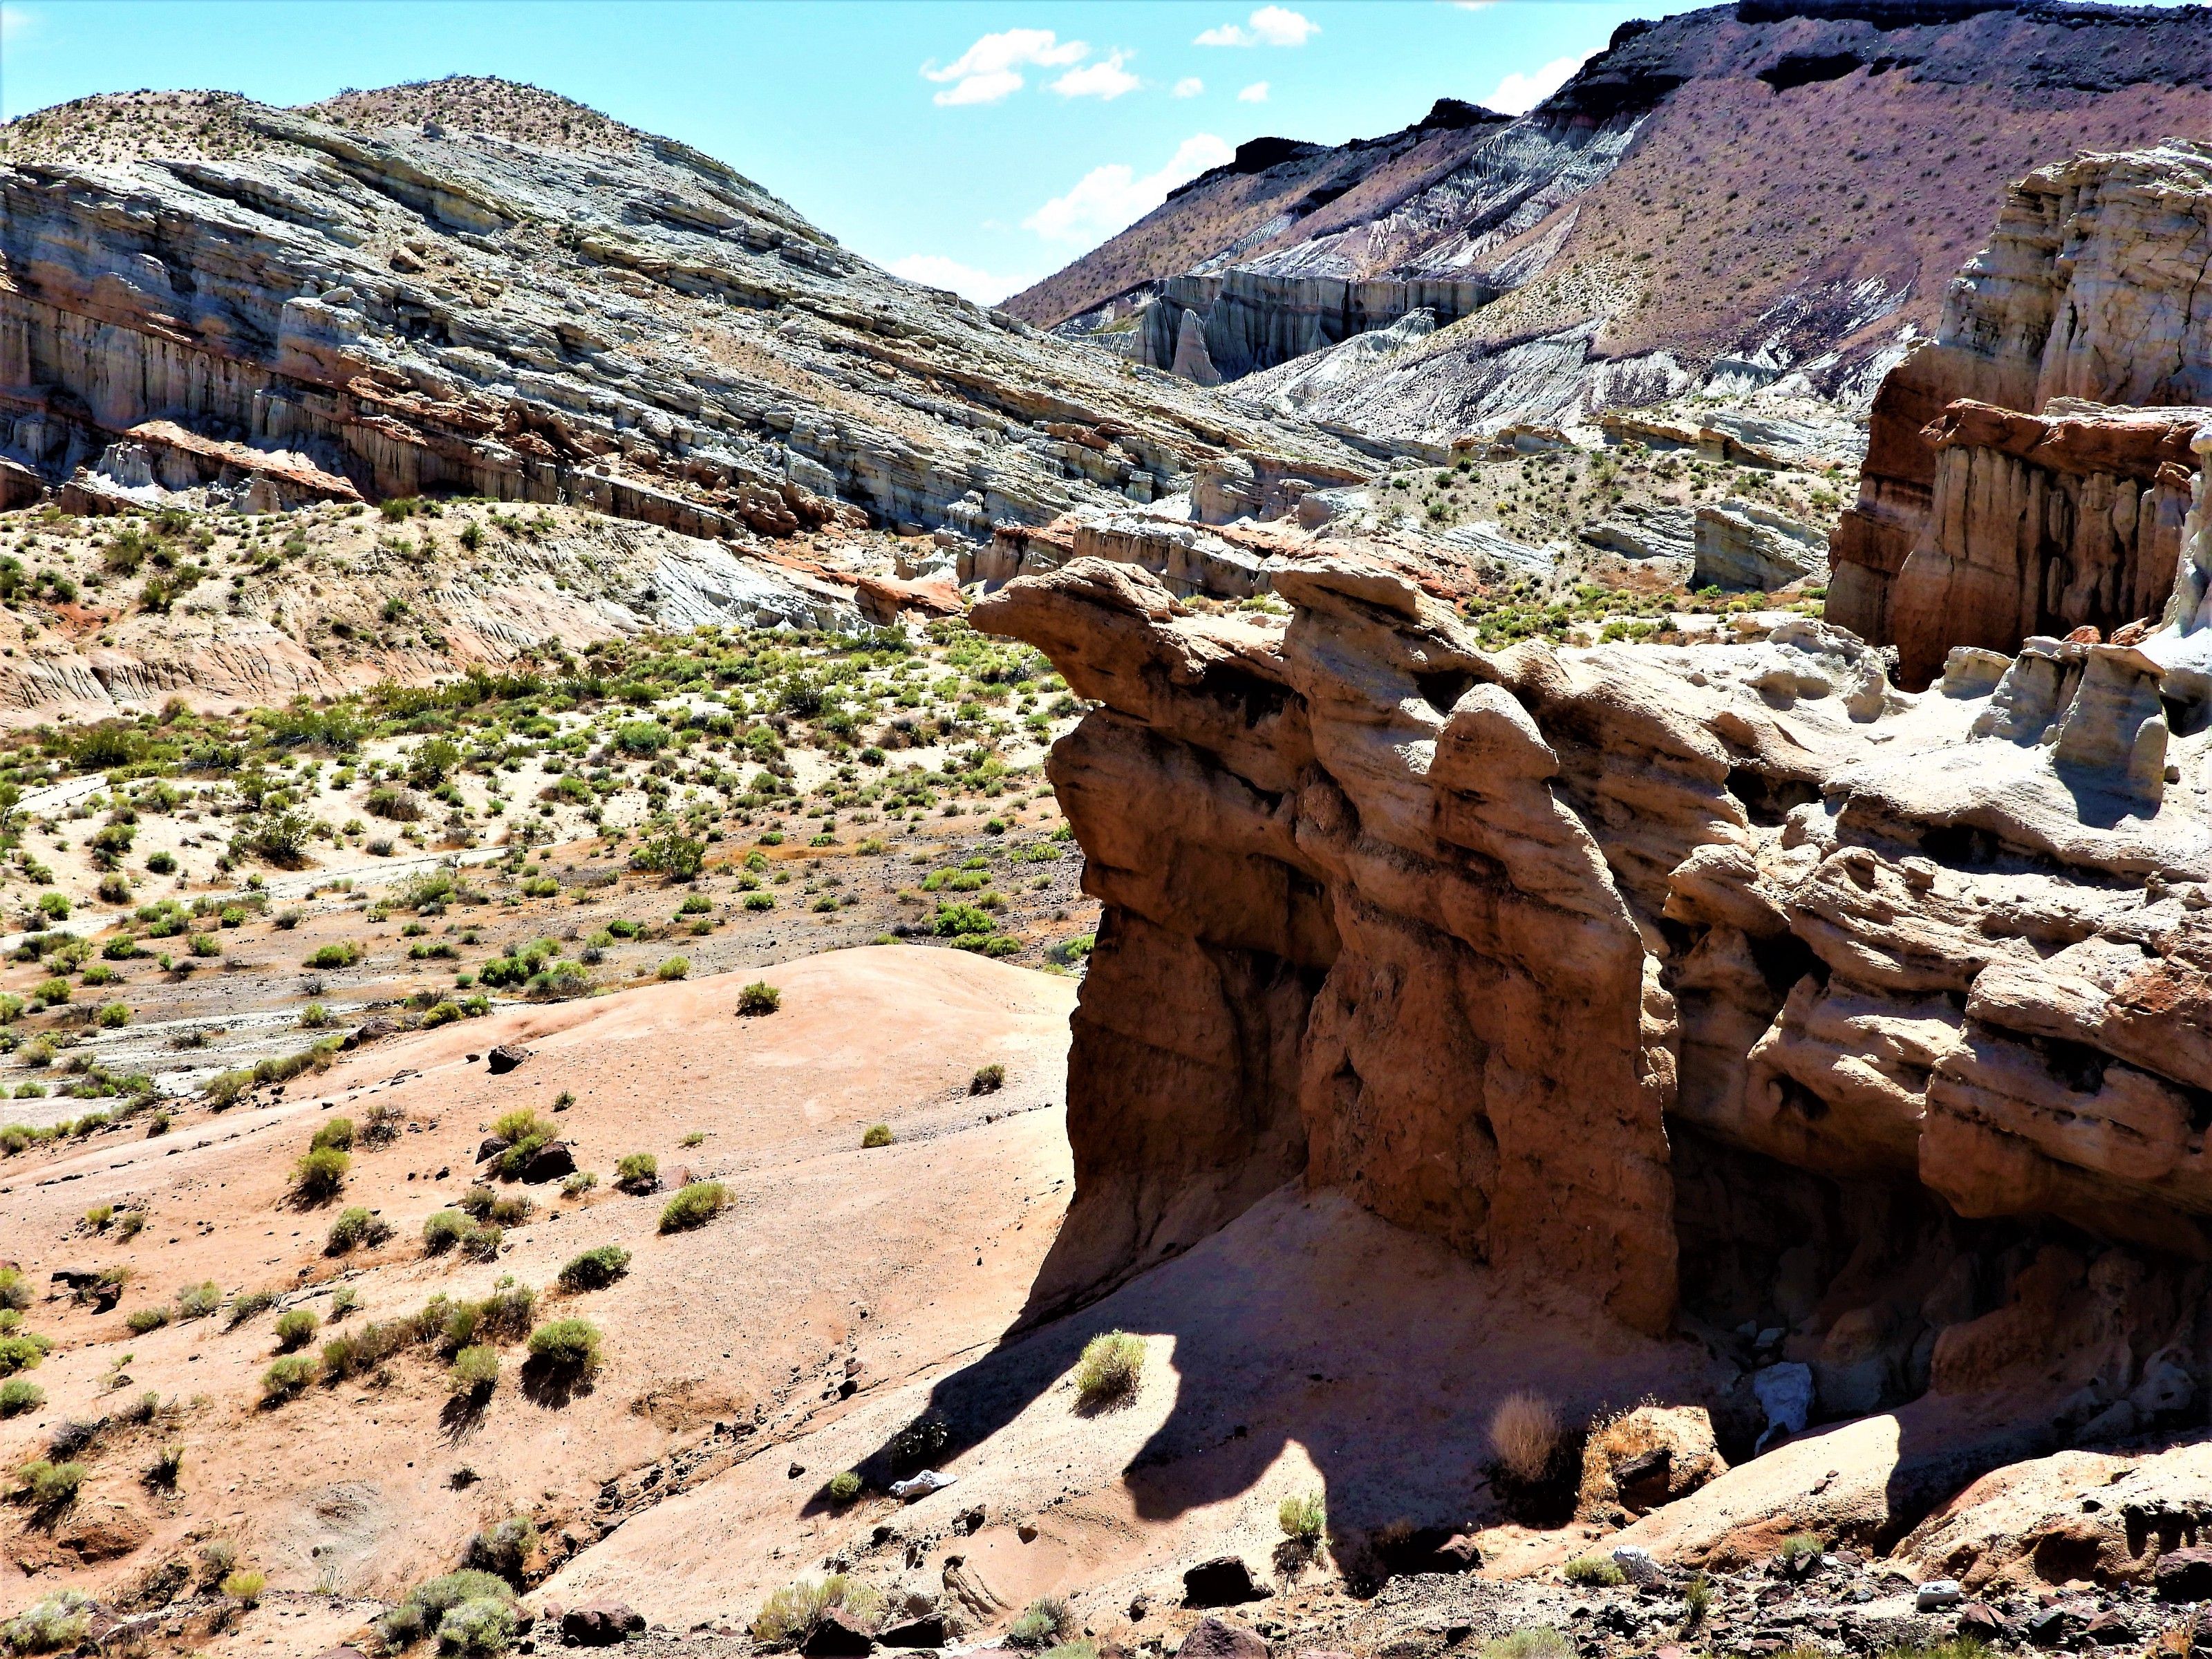 Saving California's Red Rock Canyon State Park Without End